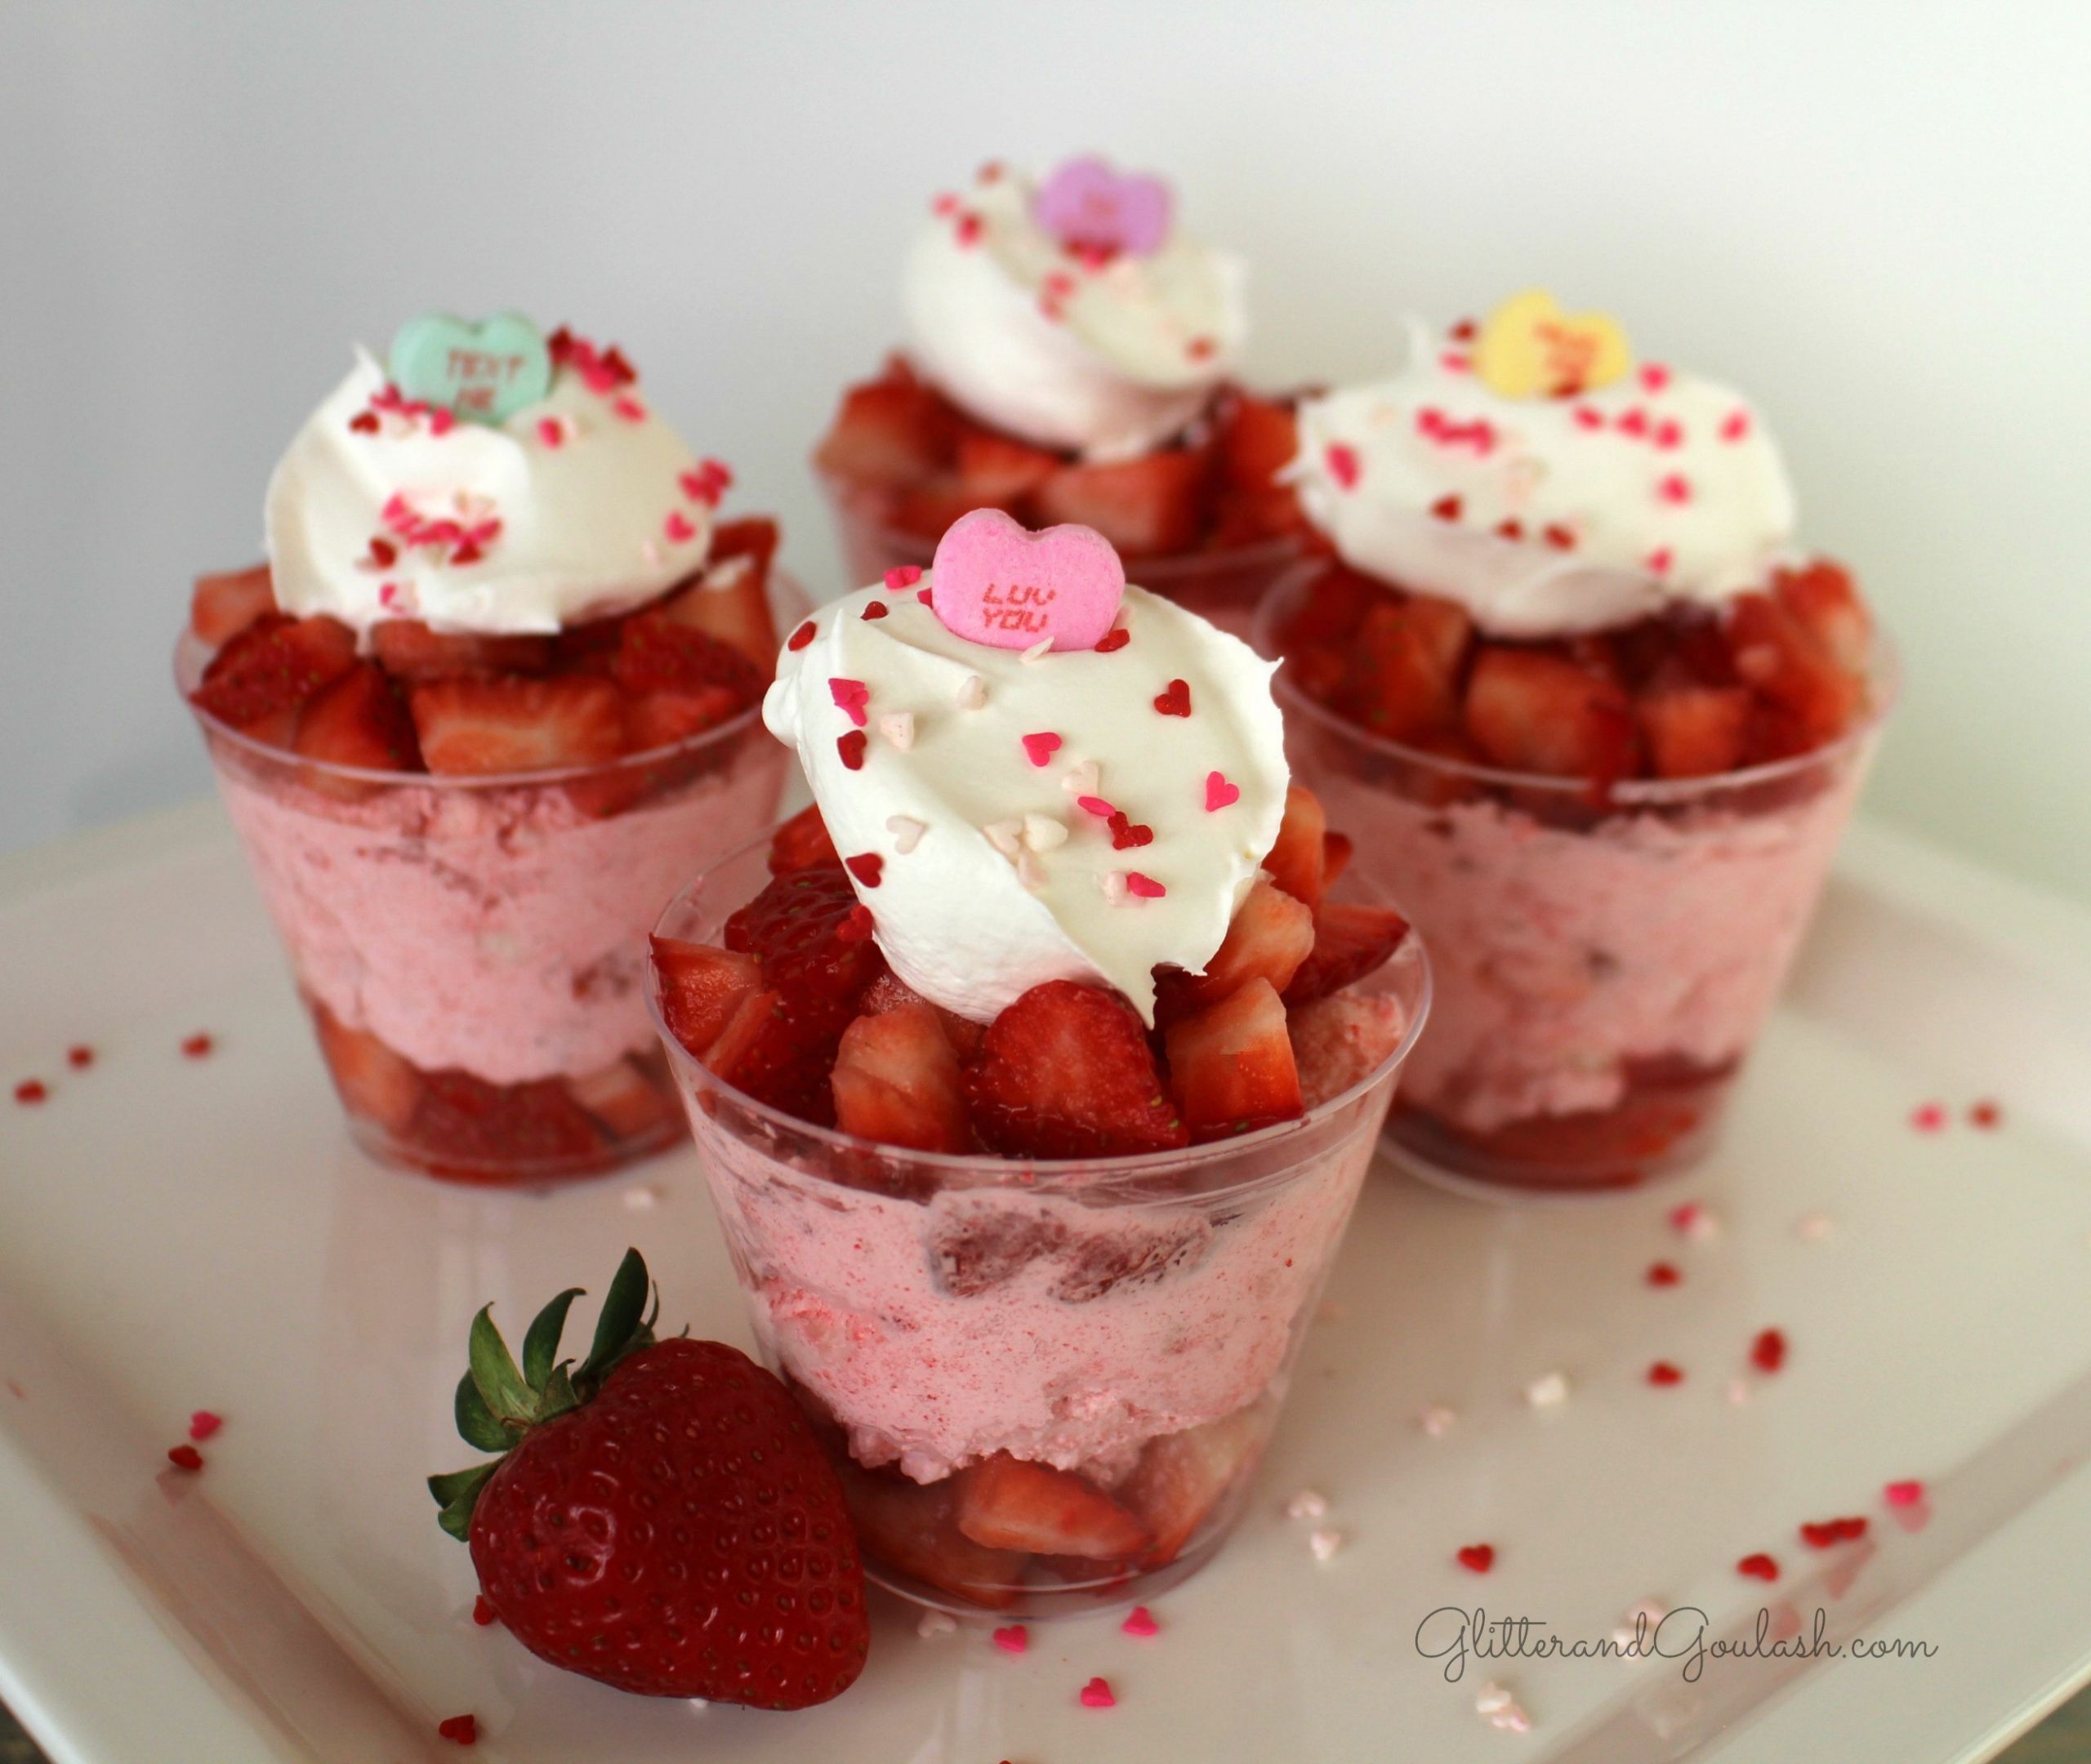 Easy Make Ahead Desserts
 Quick and Easy Make Ahead Strawberry Fluff Dessert